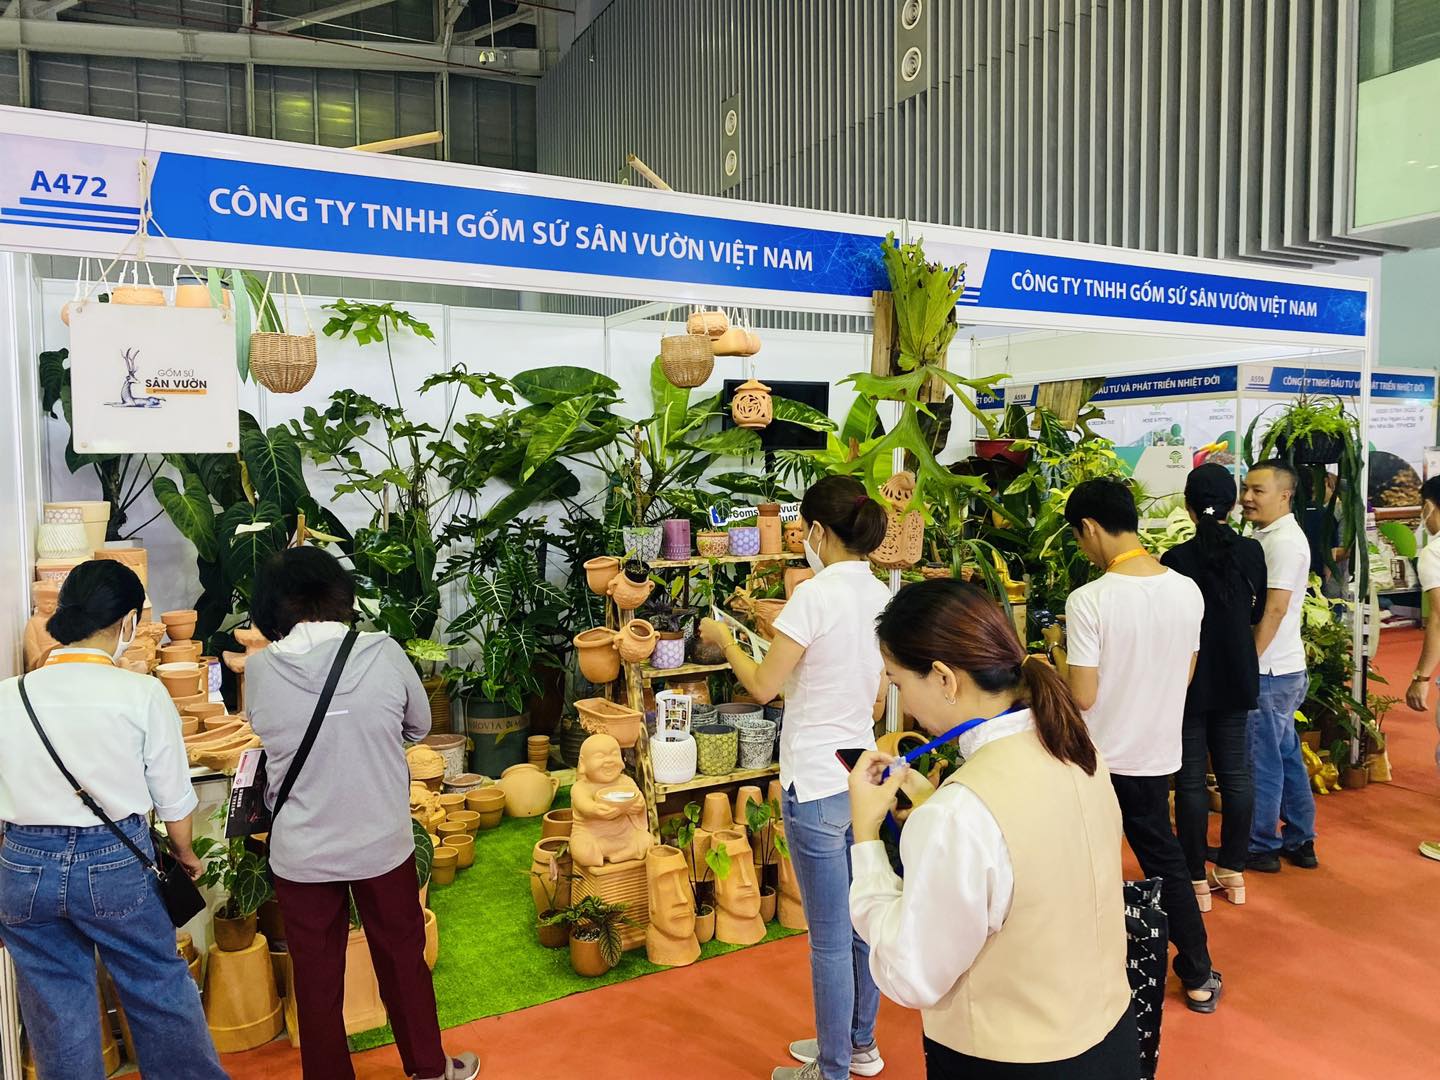 Some main products are displayed at the Garden & Landscape Vietnam event